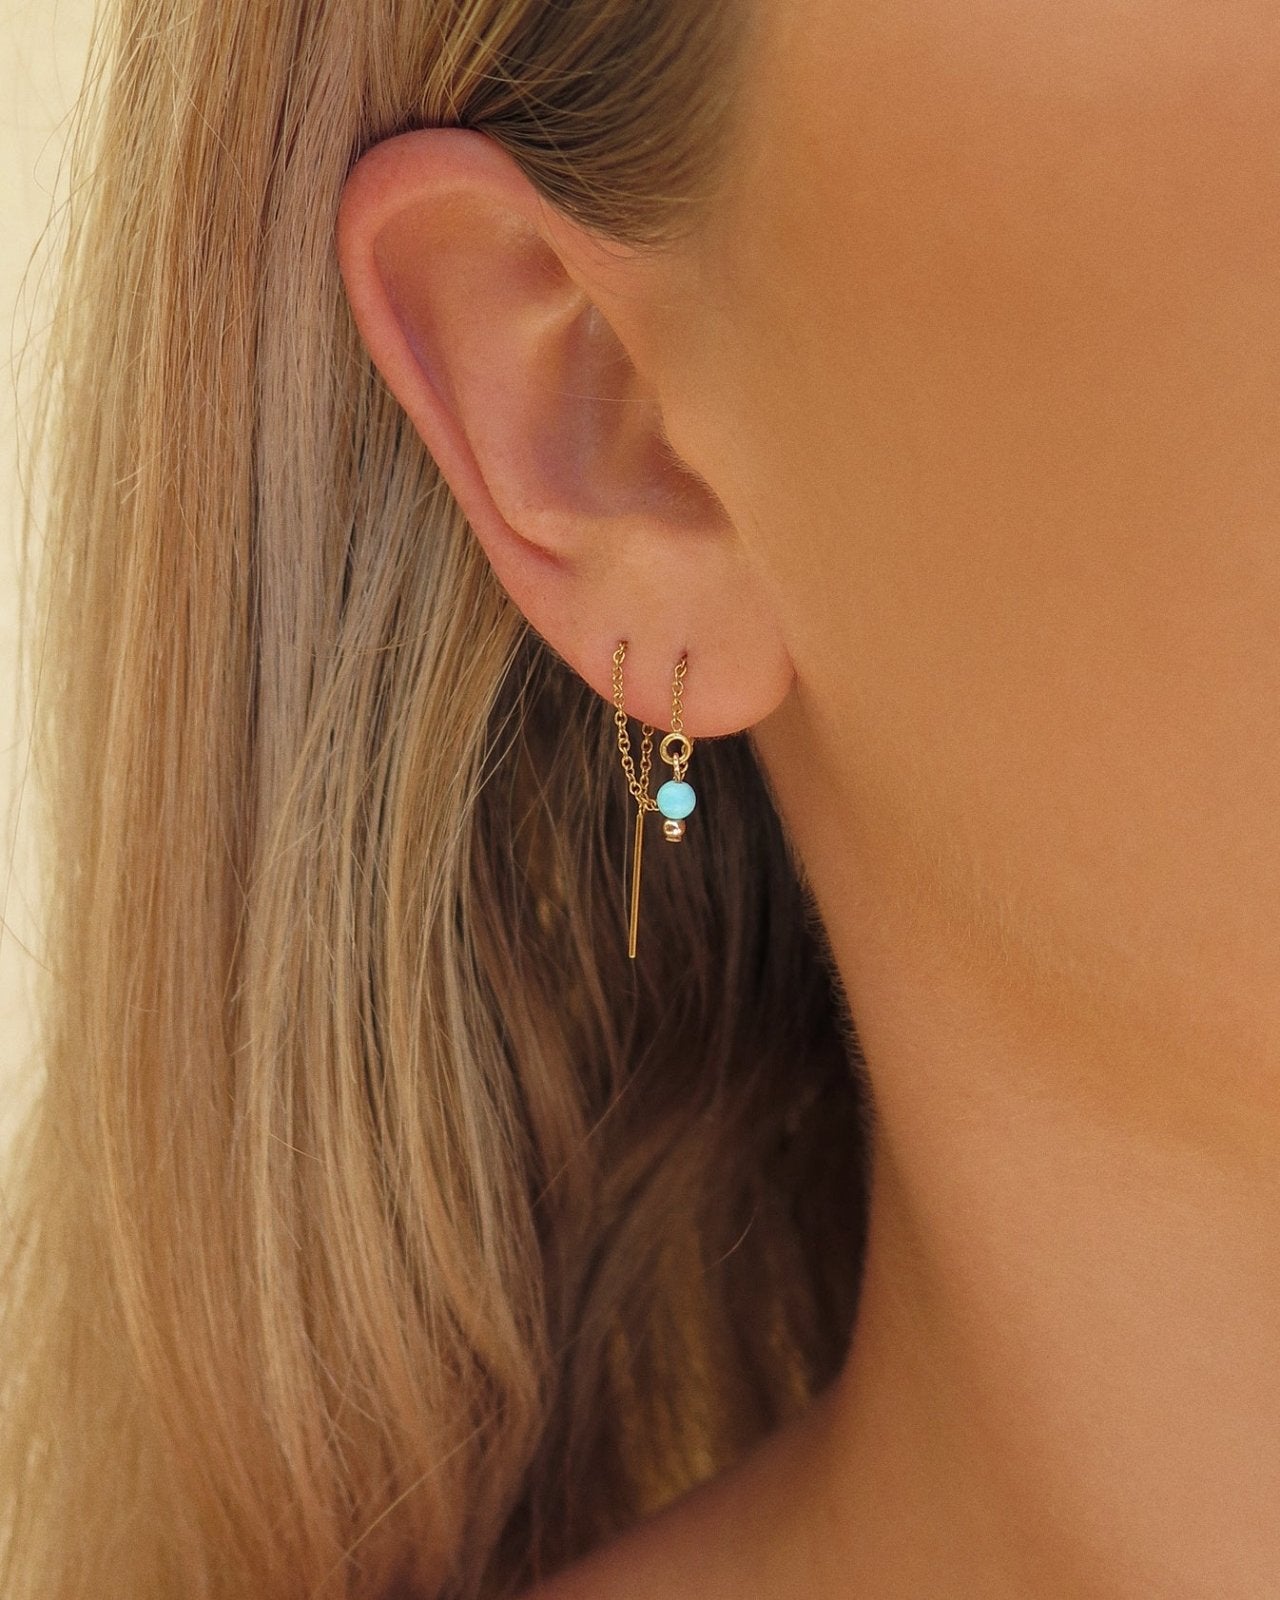 Load image into Gallery viewer, TURQUOISE THREADER EARRINGS - The Littl - 14k Yellow Gold Fill -
